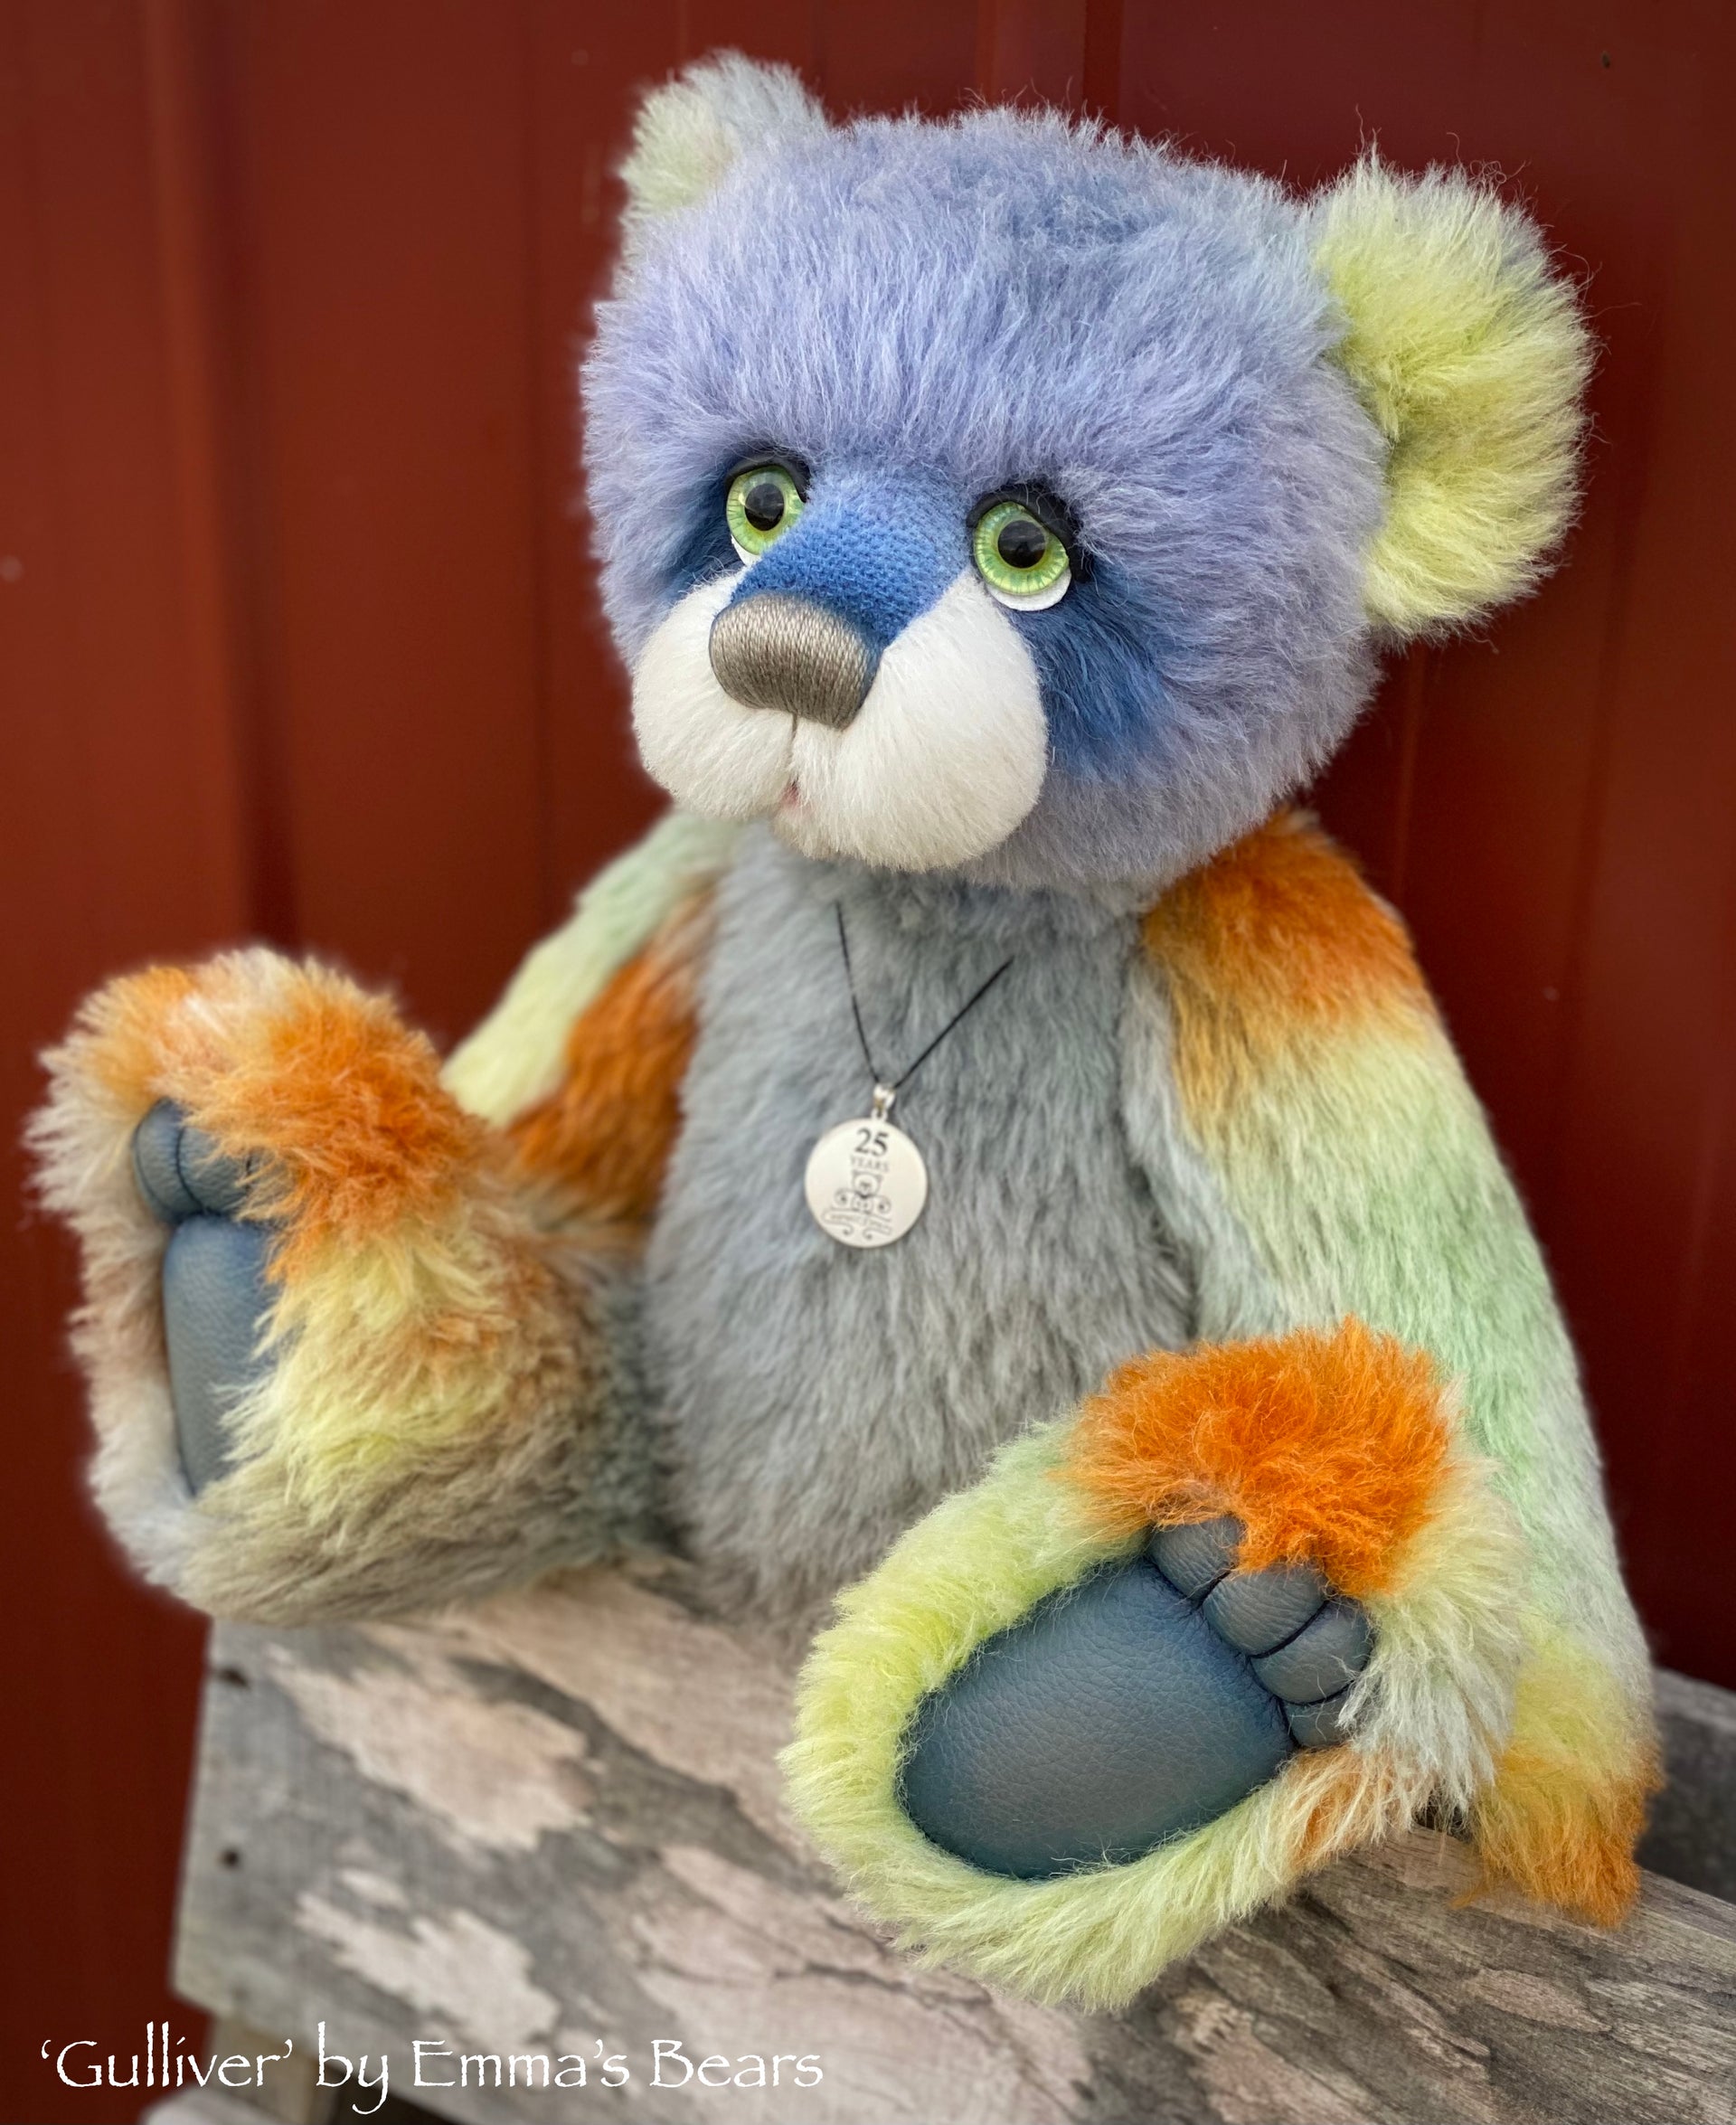 Gulliver - 16" SPECIAL 25th Anniversary Collection Hand-dyed mohair Artist Bear by Emmas Bears - OOAK